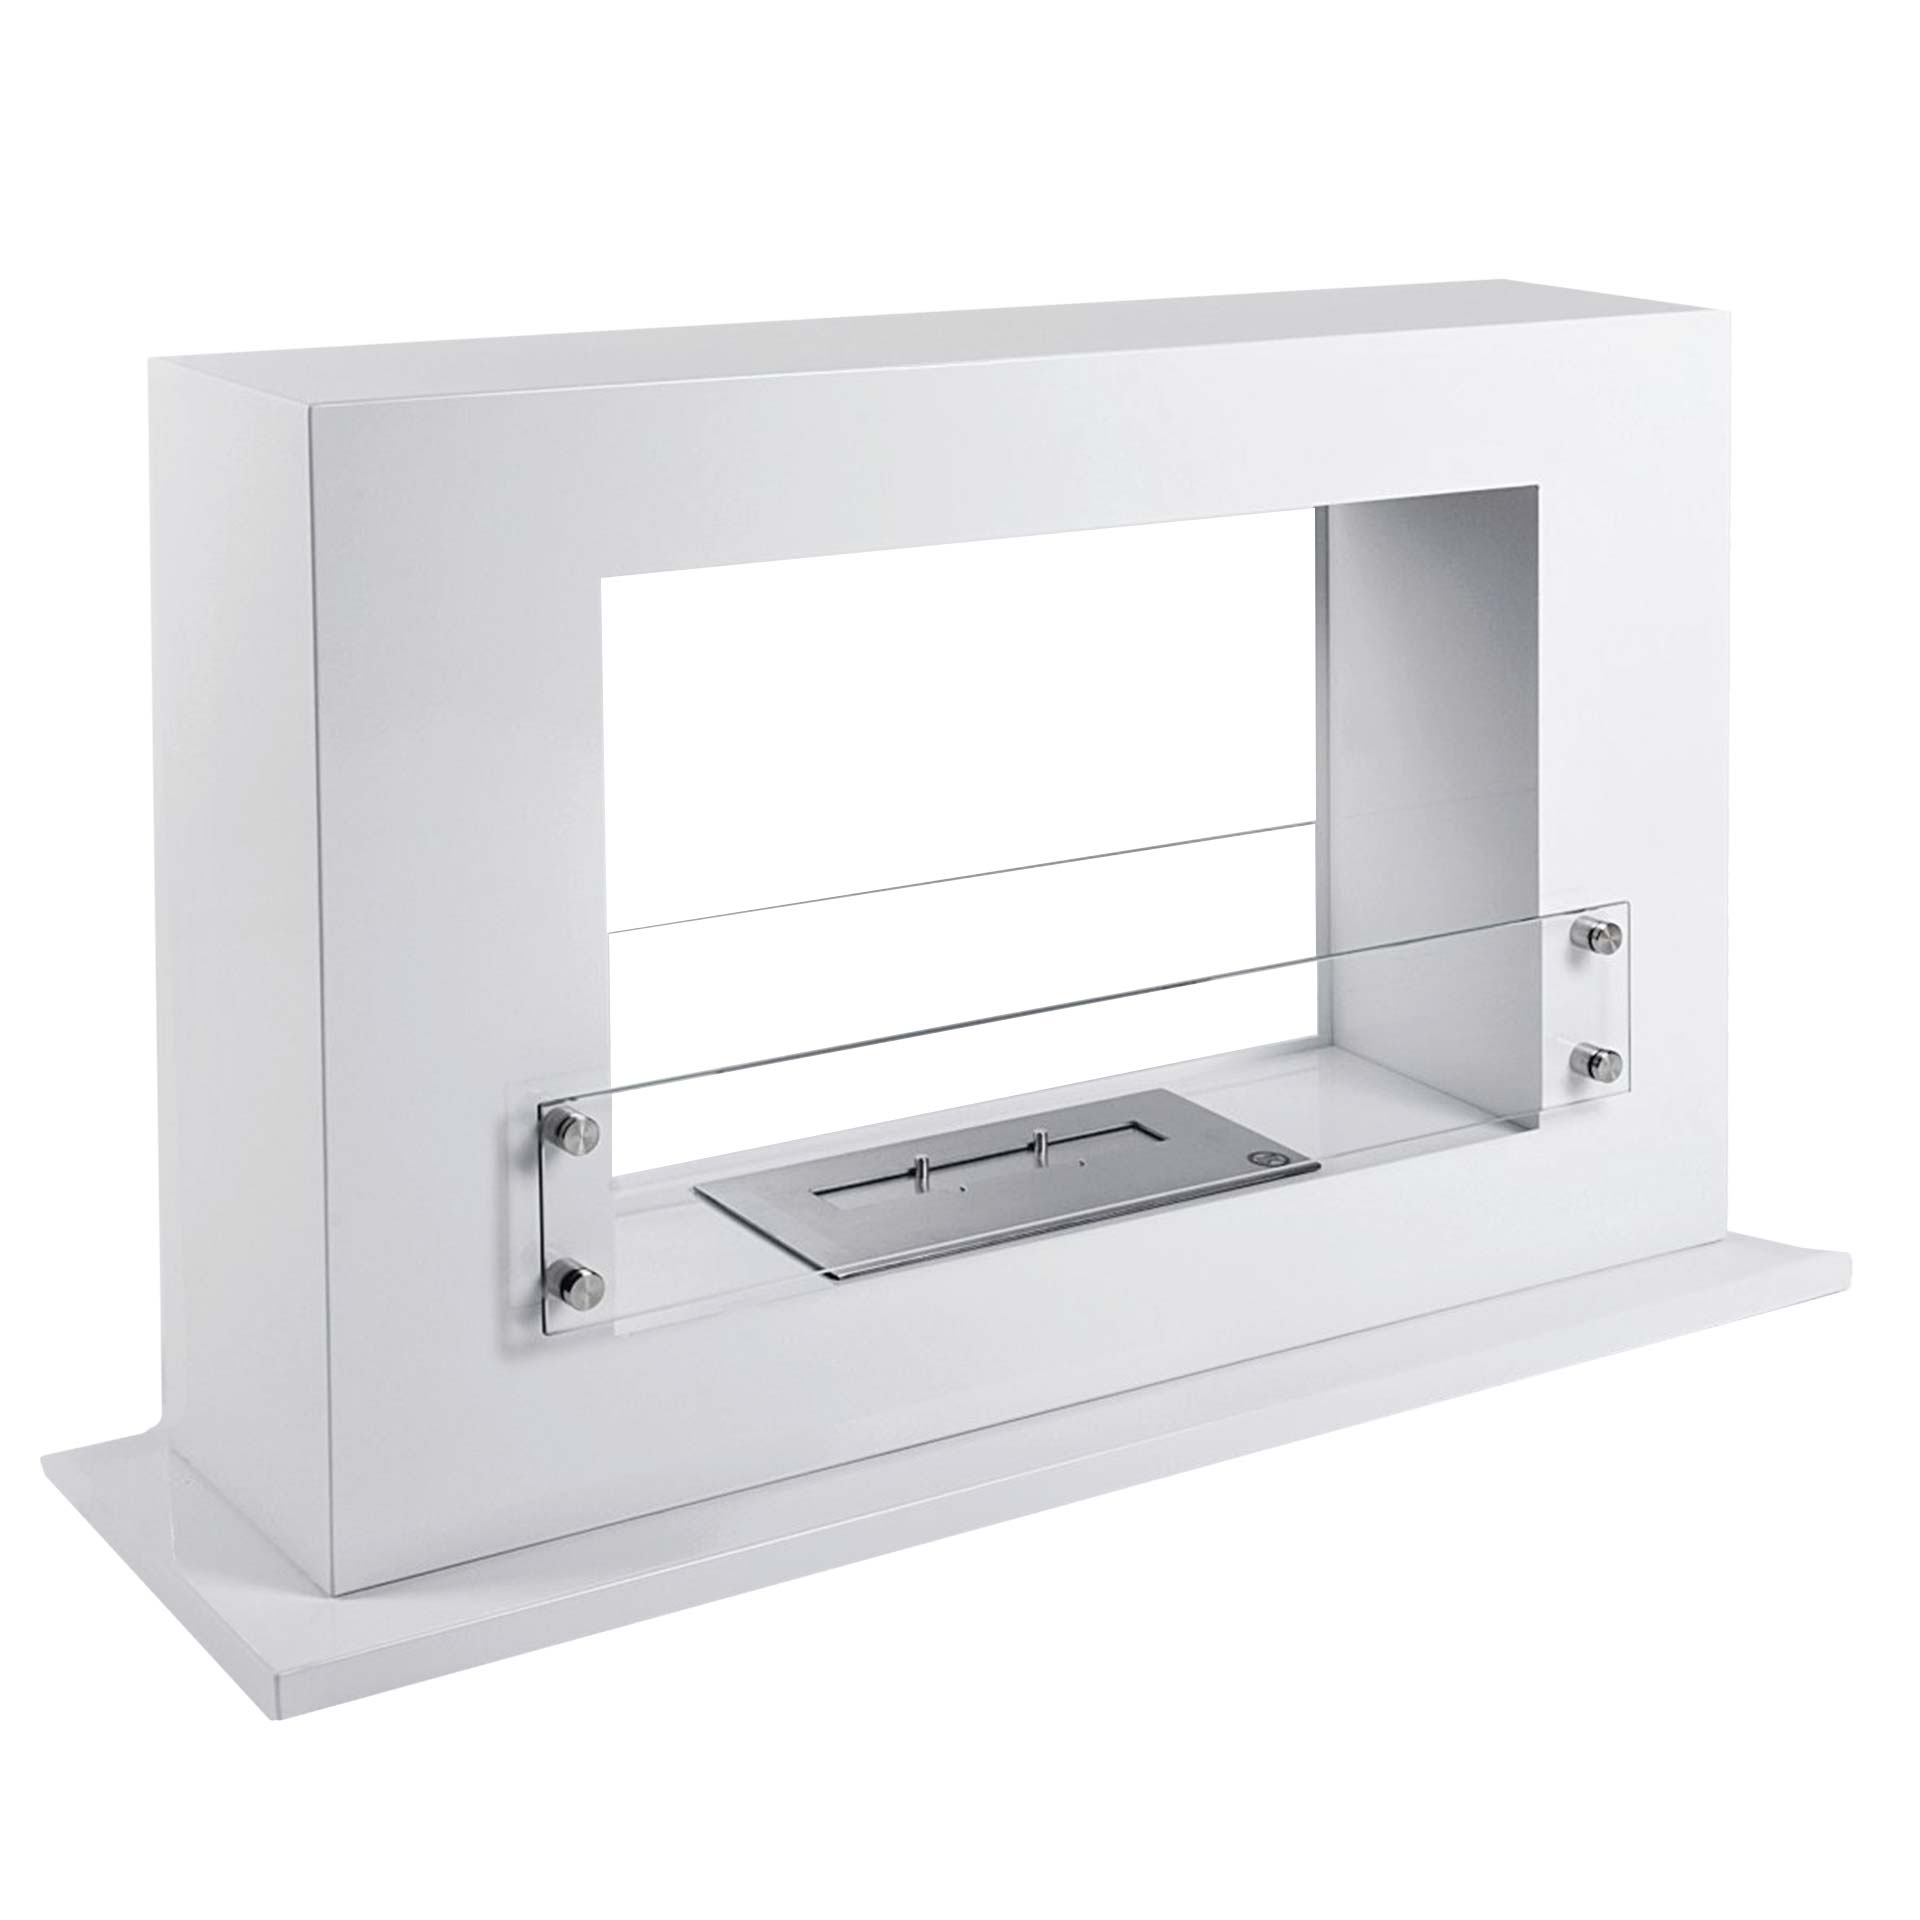 LILIMO Bodenkamin BOLOGNA AF15WH 100 x 62,5 x 30cm